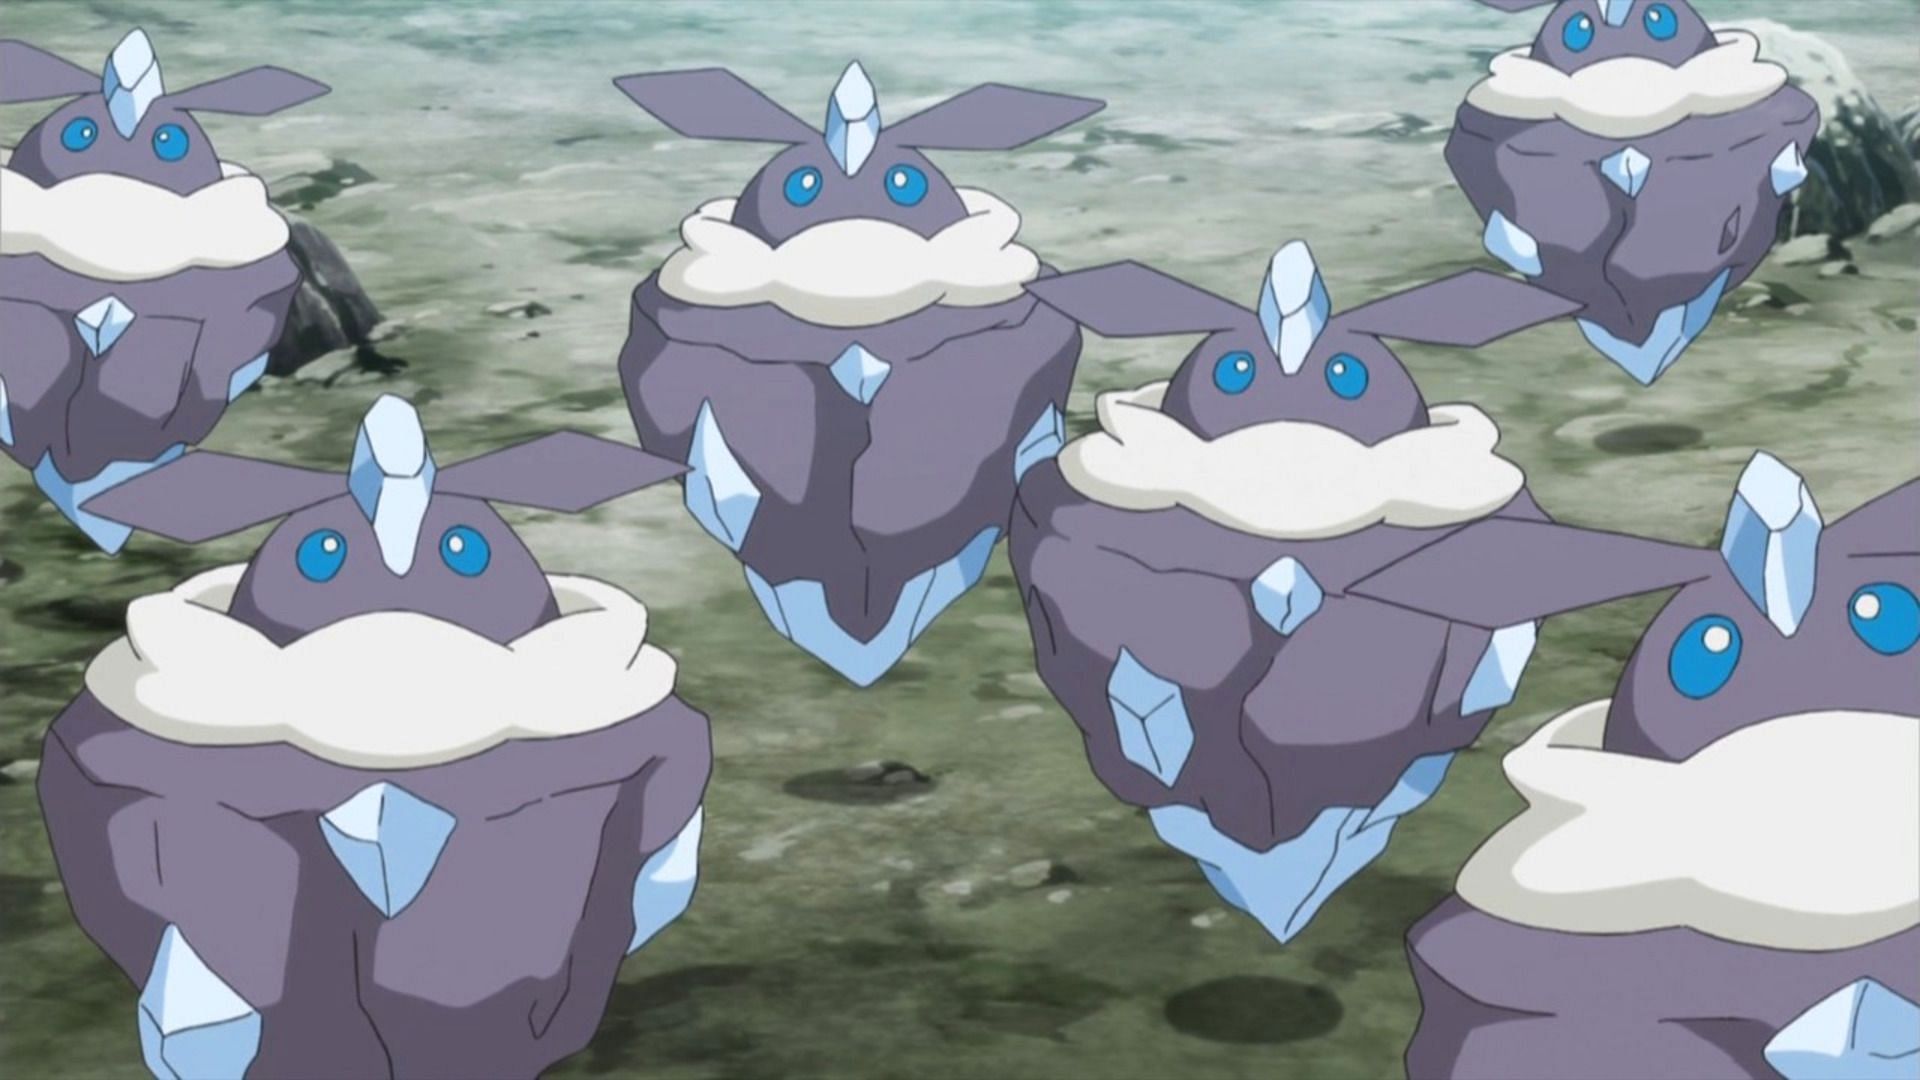 Carbink as seen in the anime (Image via Niantic)